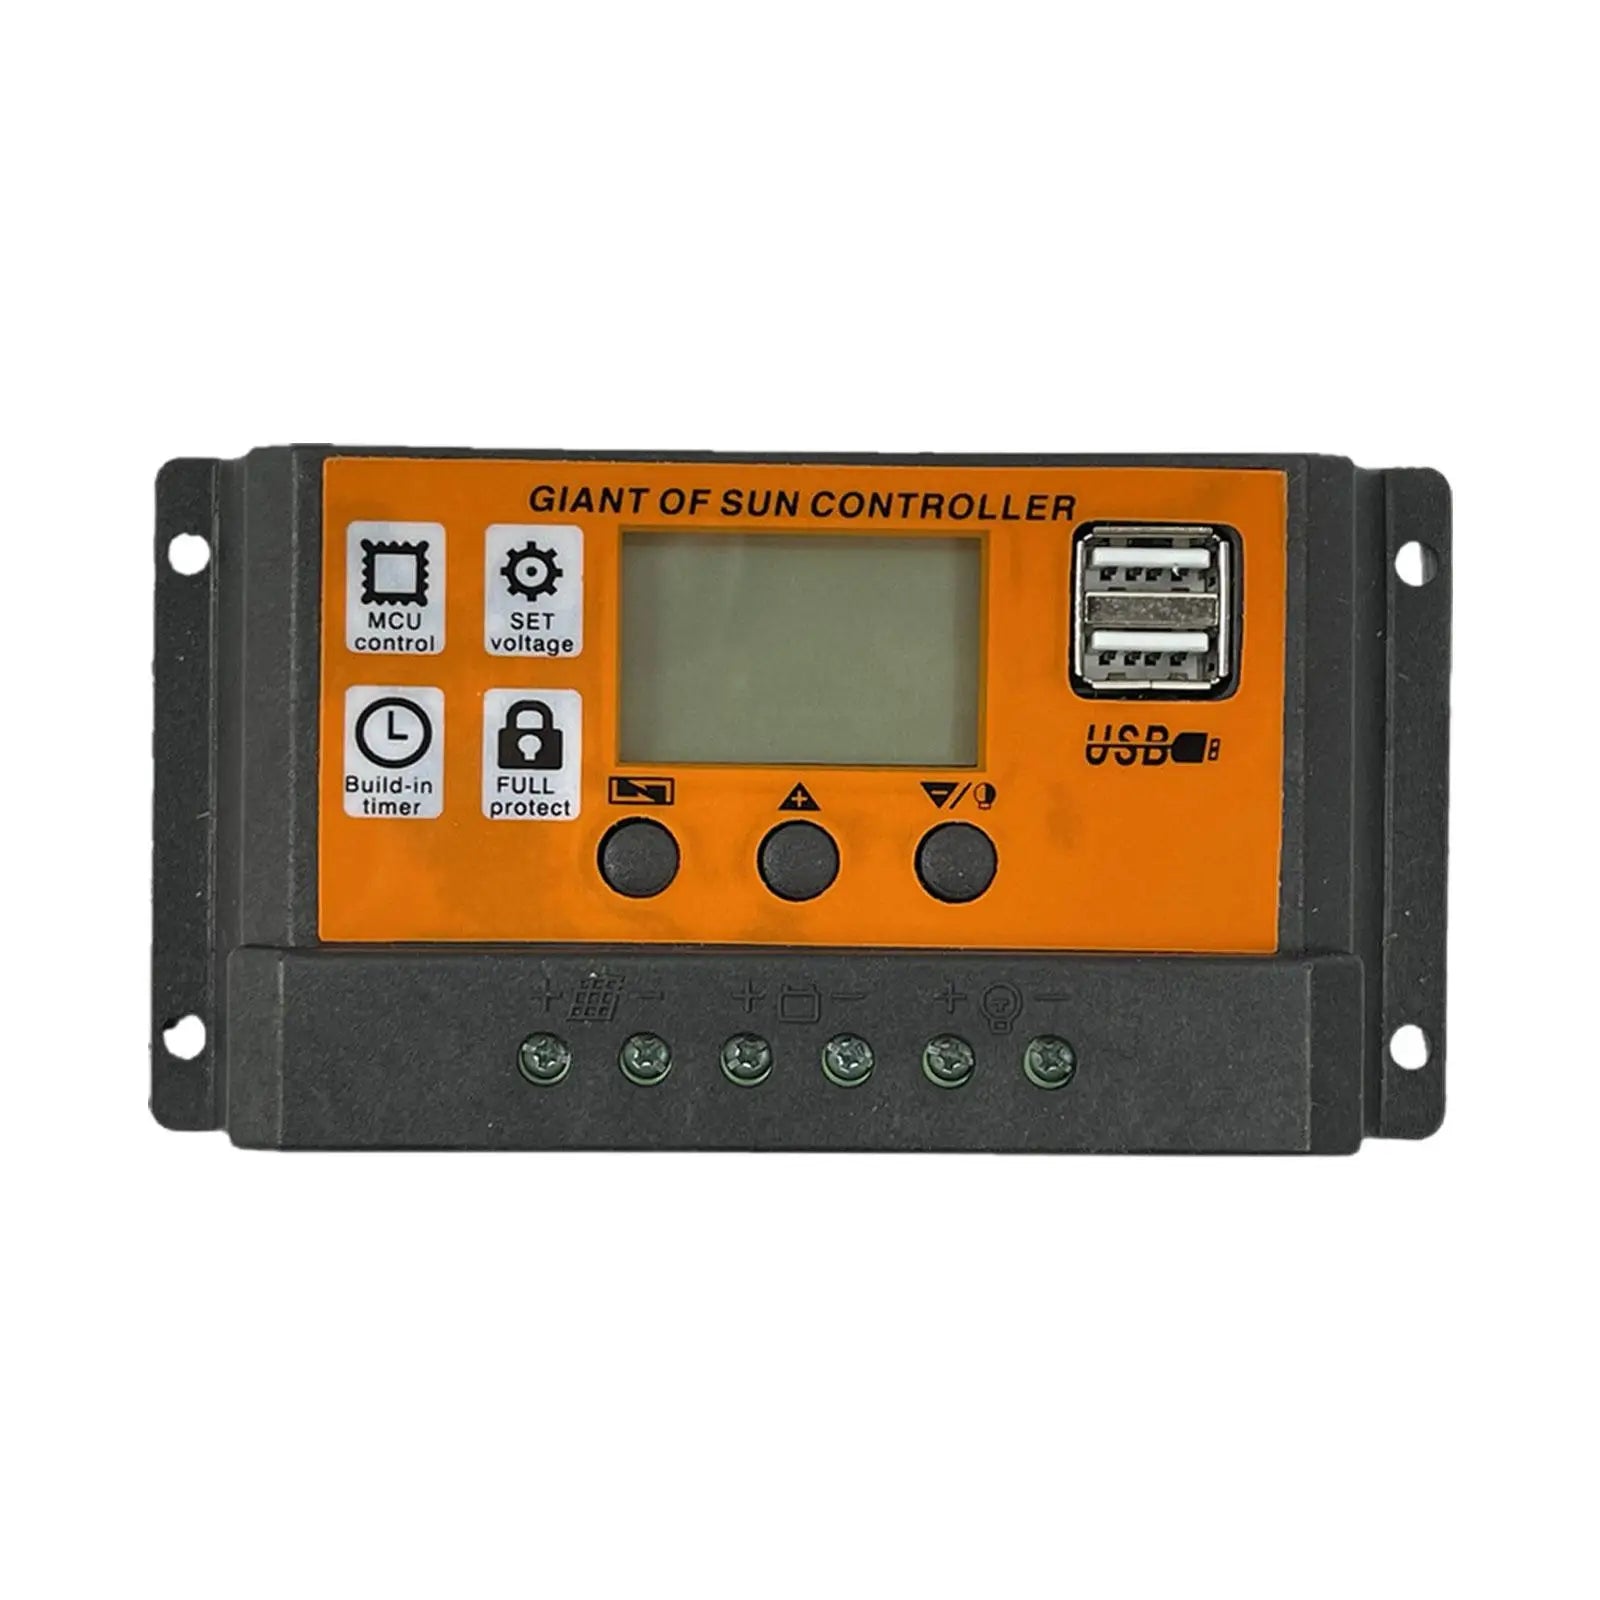 MPPT Solar Charge Controller, Advanced solar controller with timer, overcharge protection, and USB connectivity for efficient and safe solar charging.